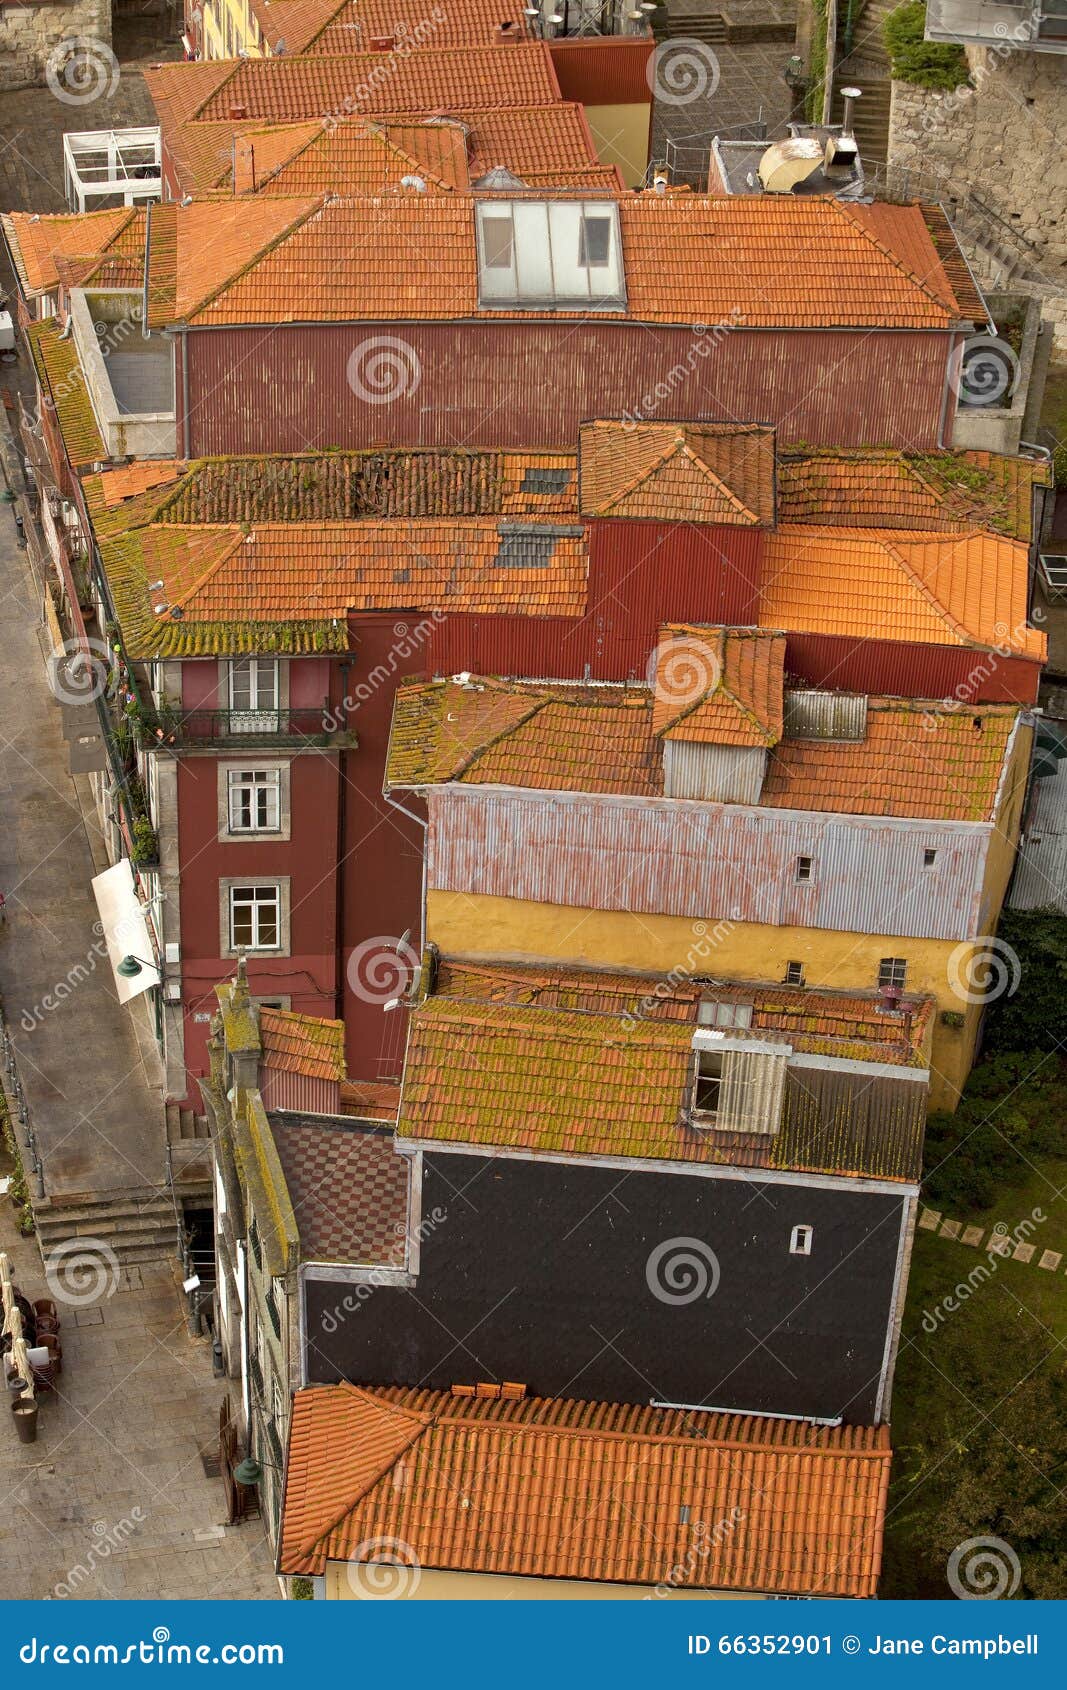 Looking Down On Clay Tile Roofs. Stock Image - Image of ...